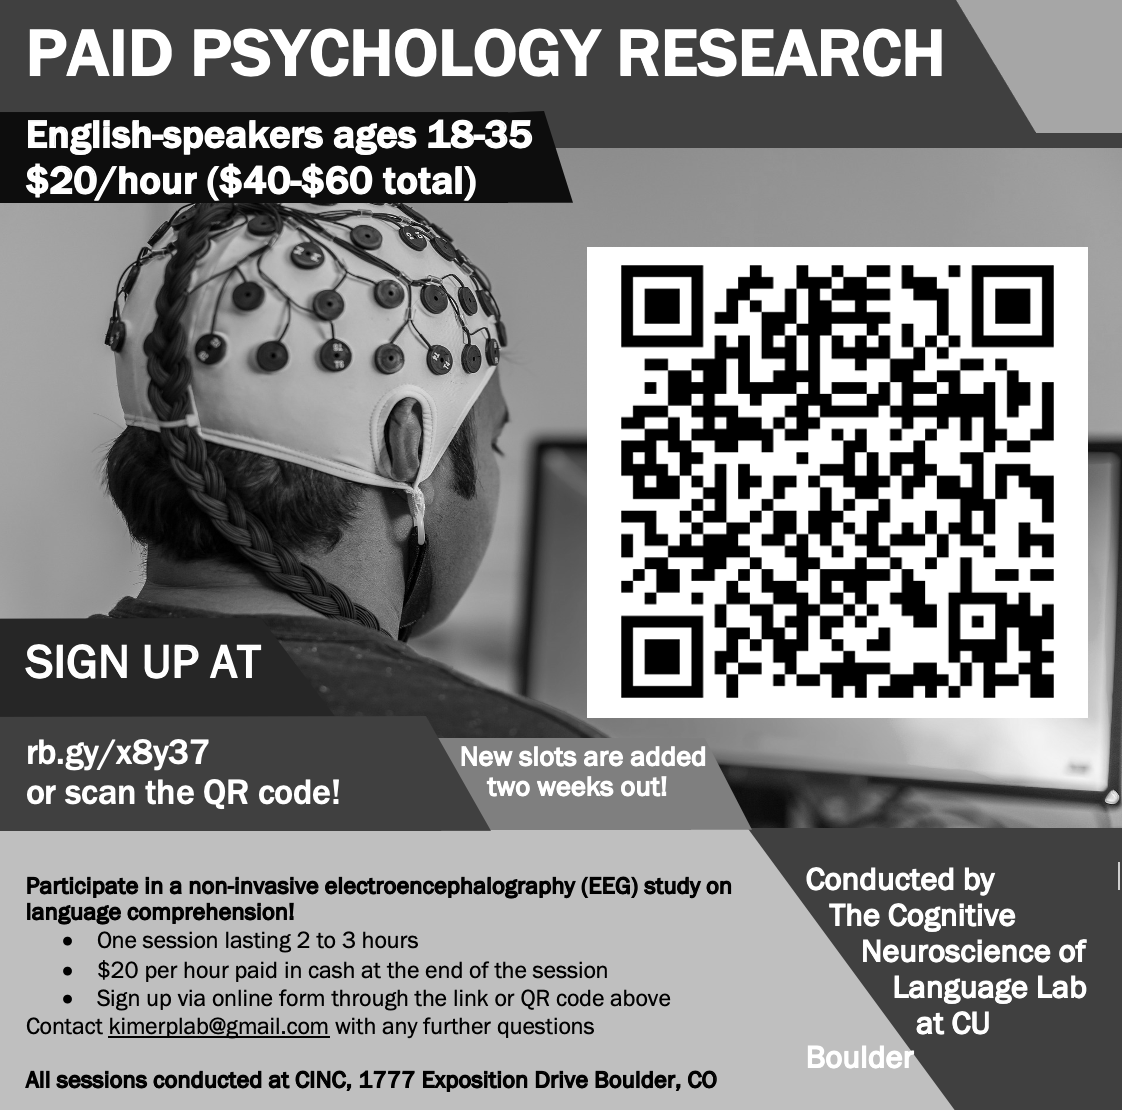 Paid psychology research with QR code